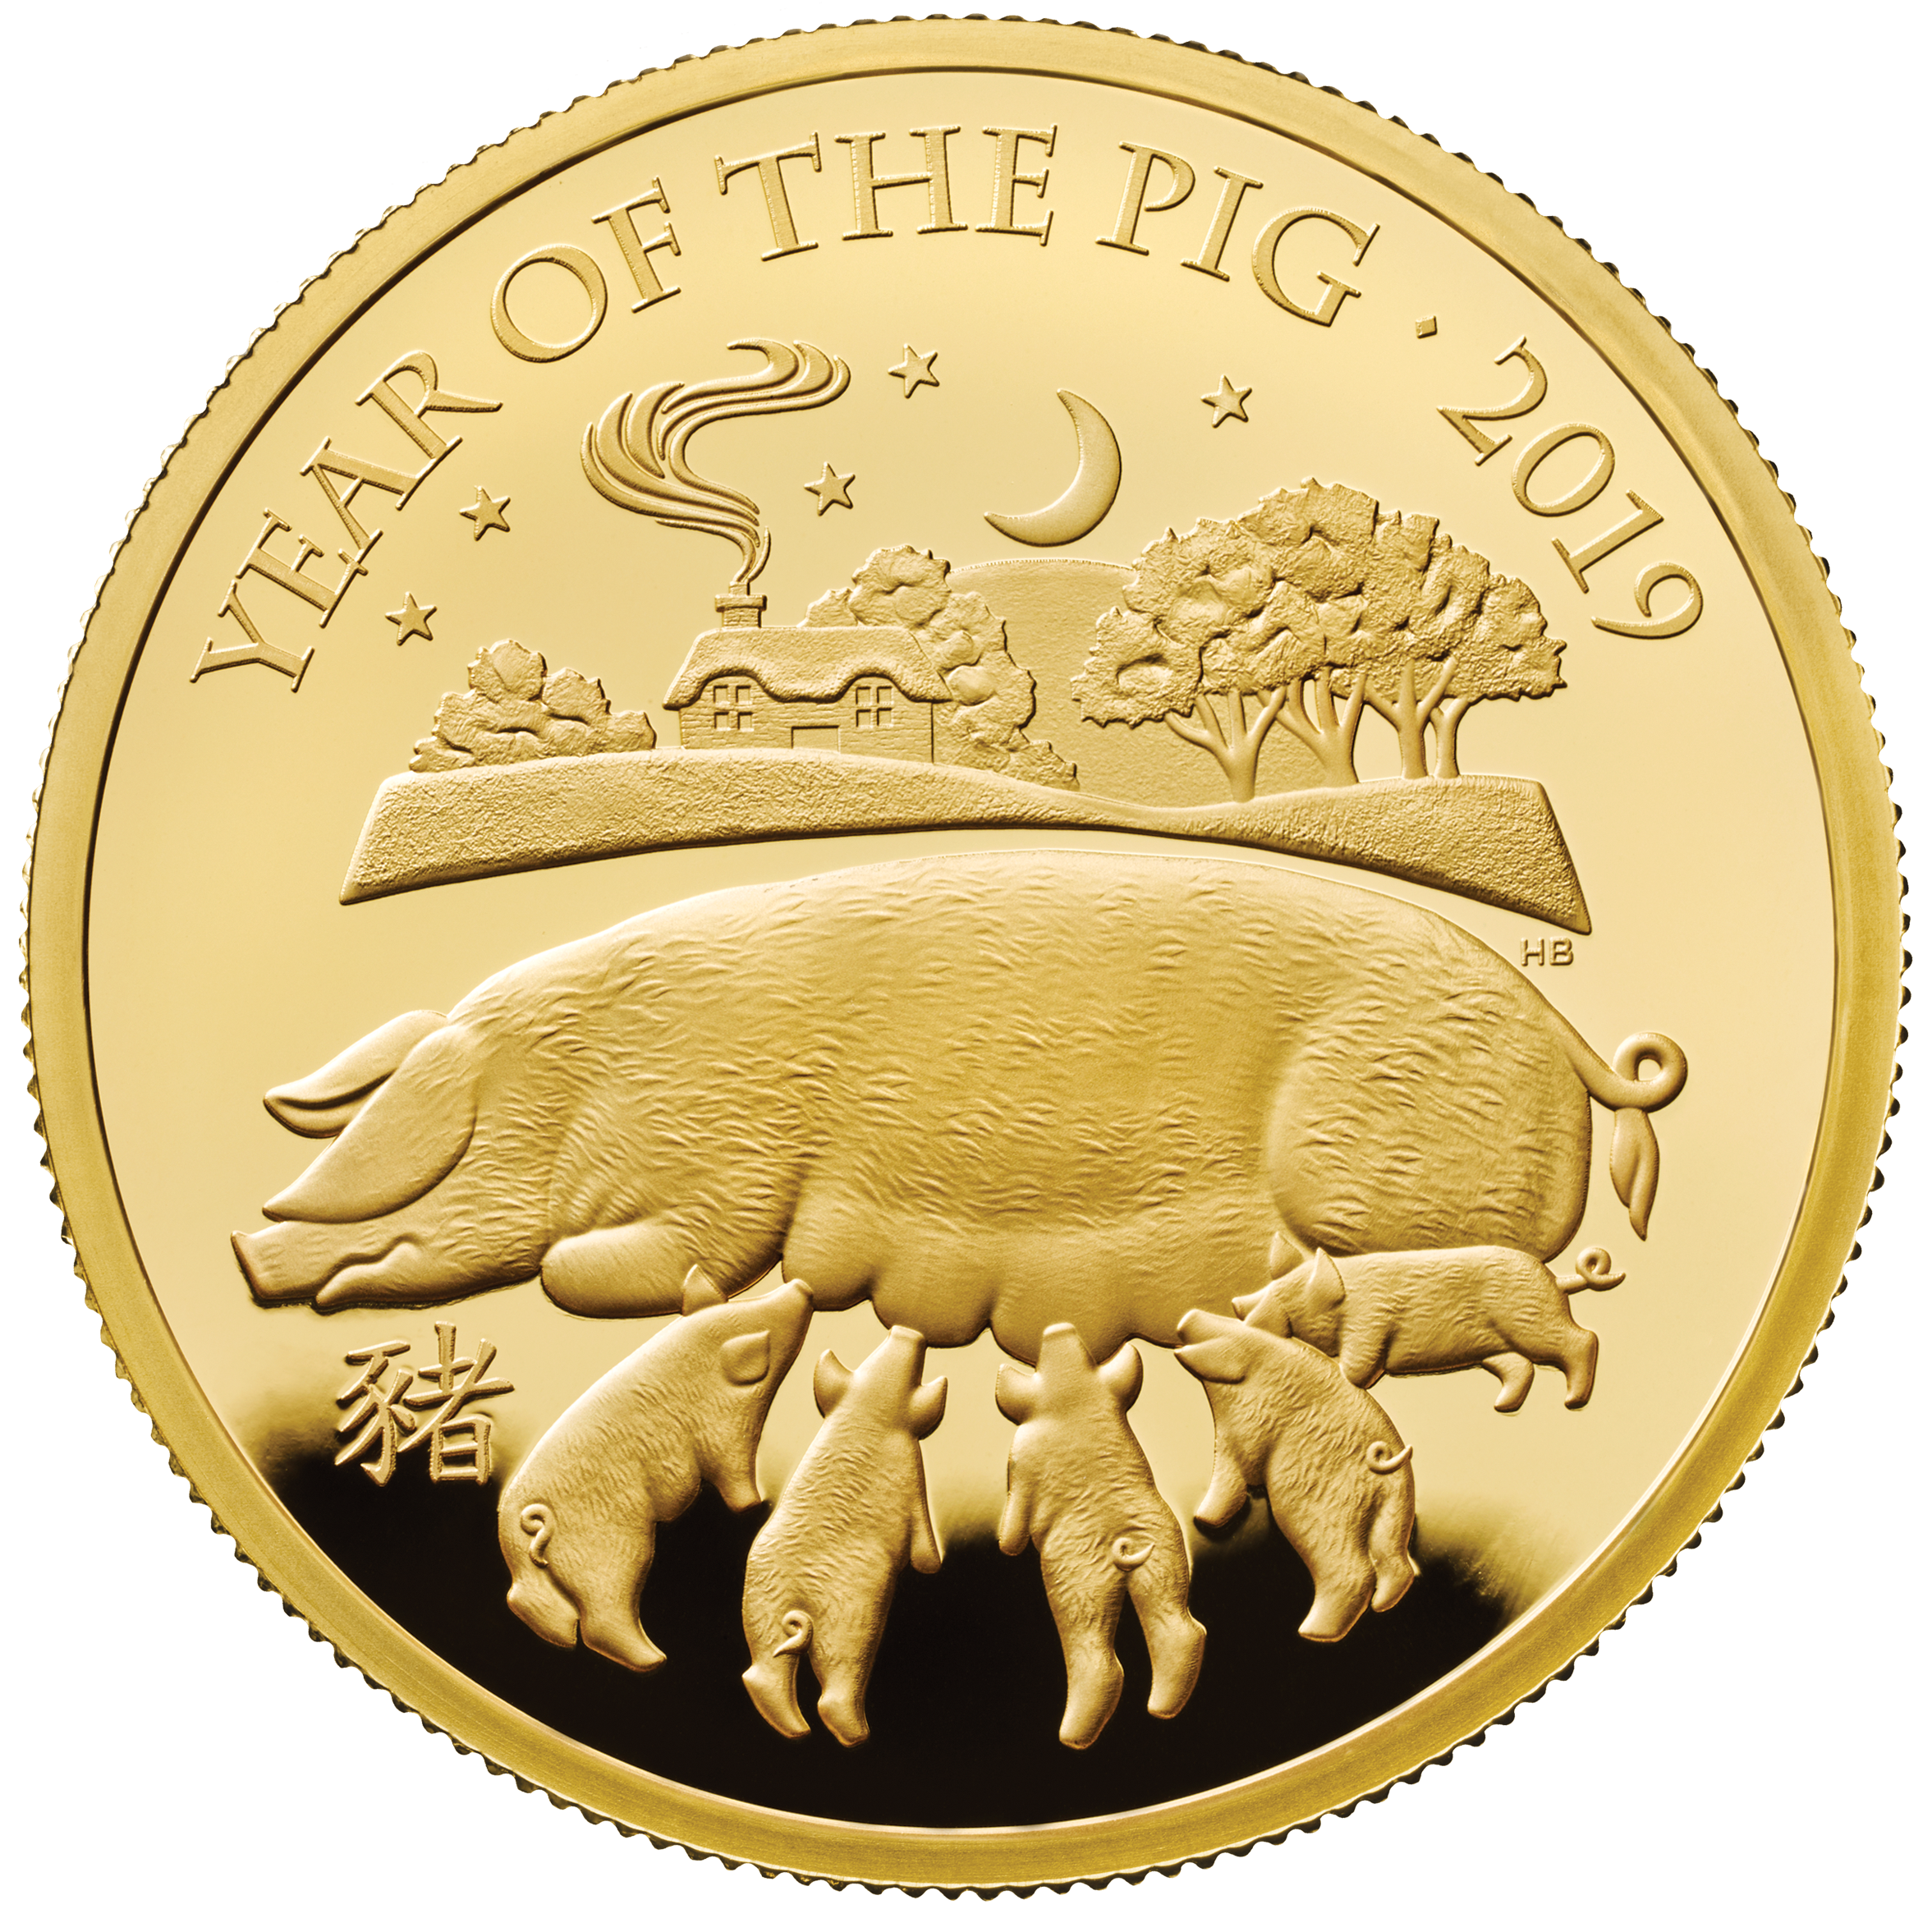 Commemorative coins for  2019 Lunar Year of the Pig struck by Royal Mint